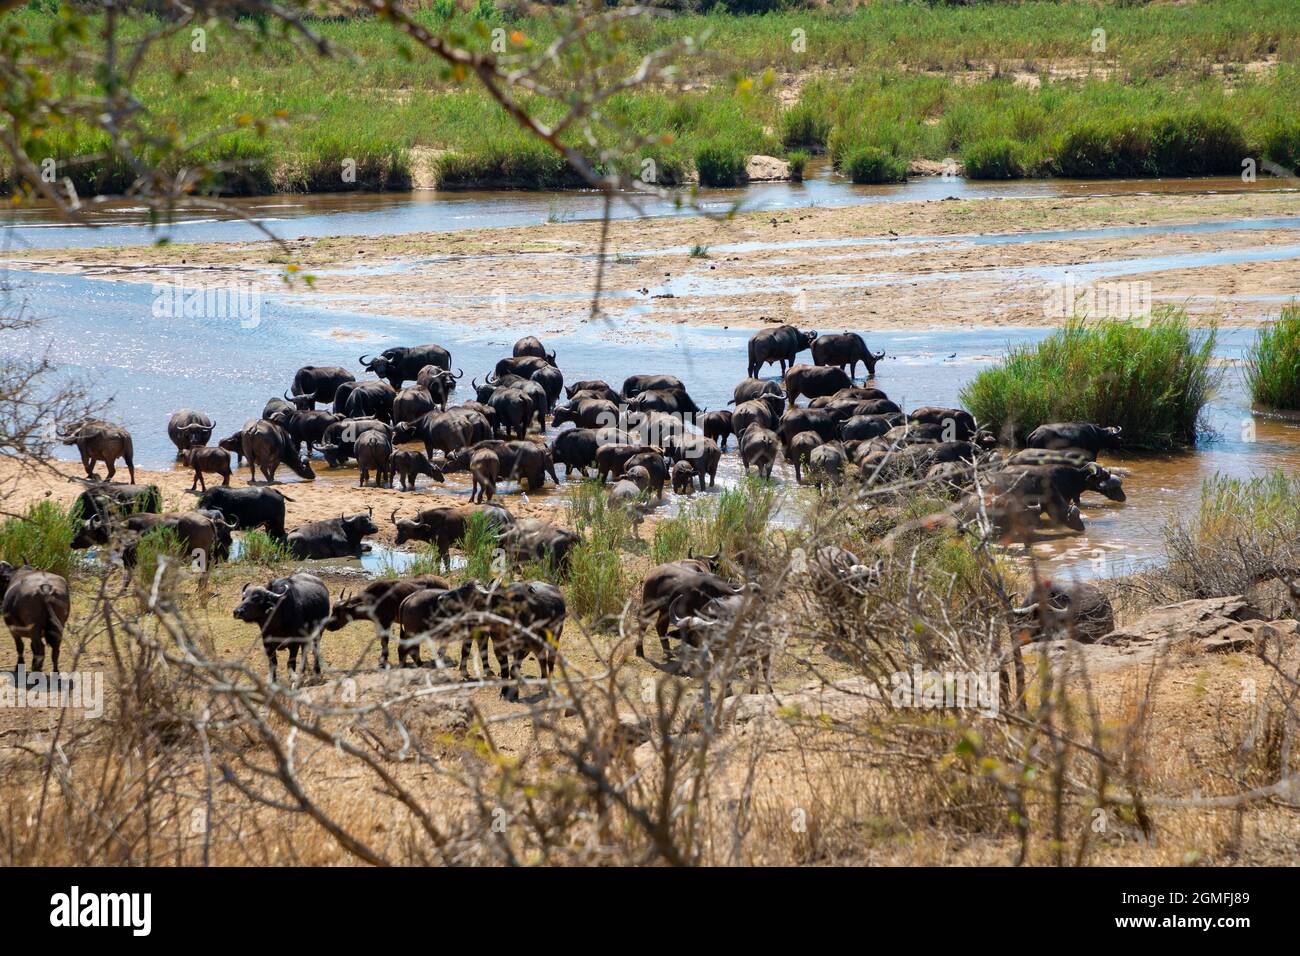 Herd of Cape buffalo drinking water in a river in Africa. Stock Photo